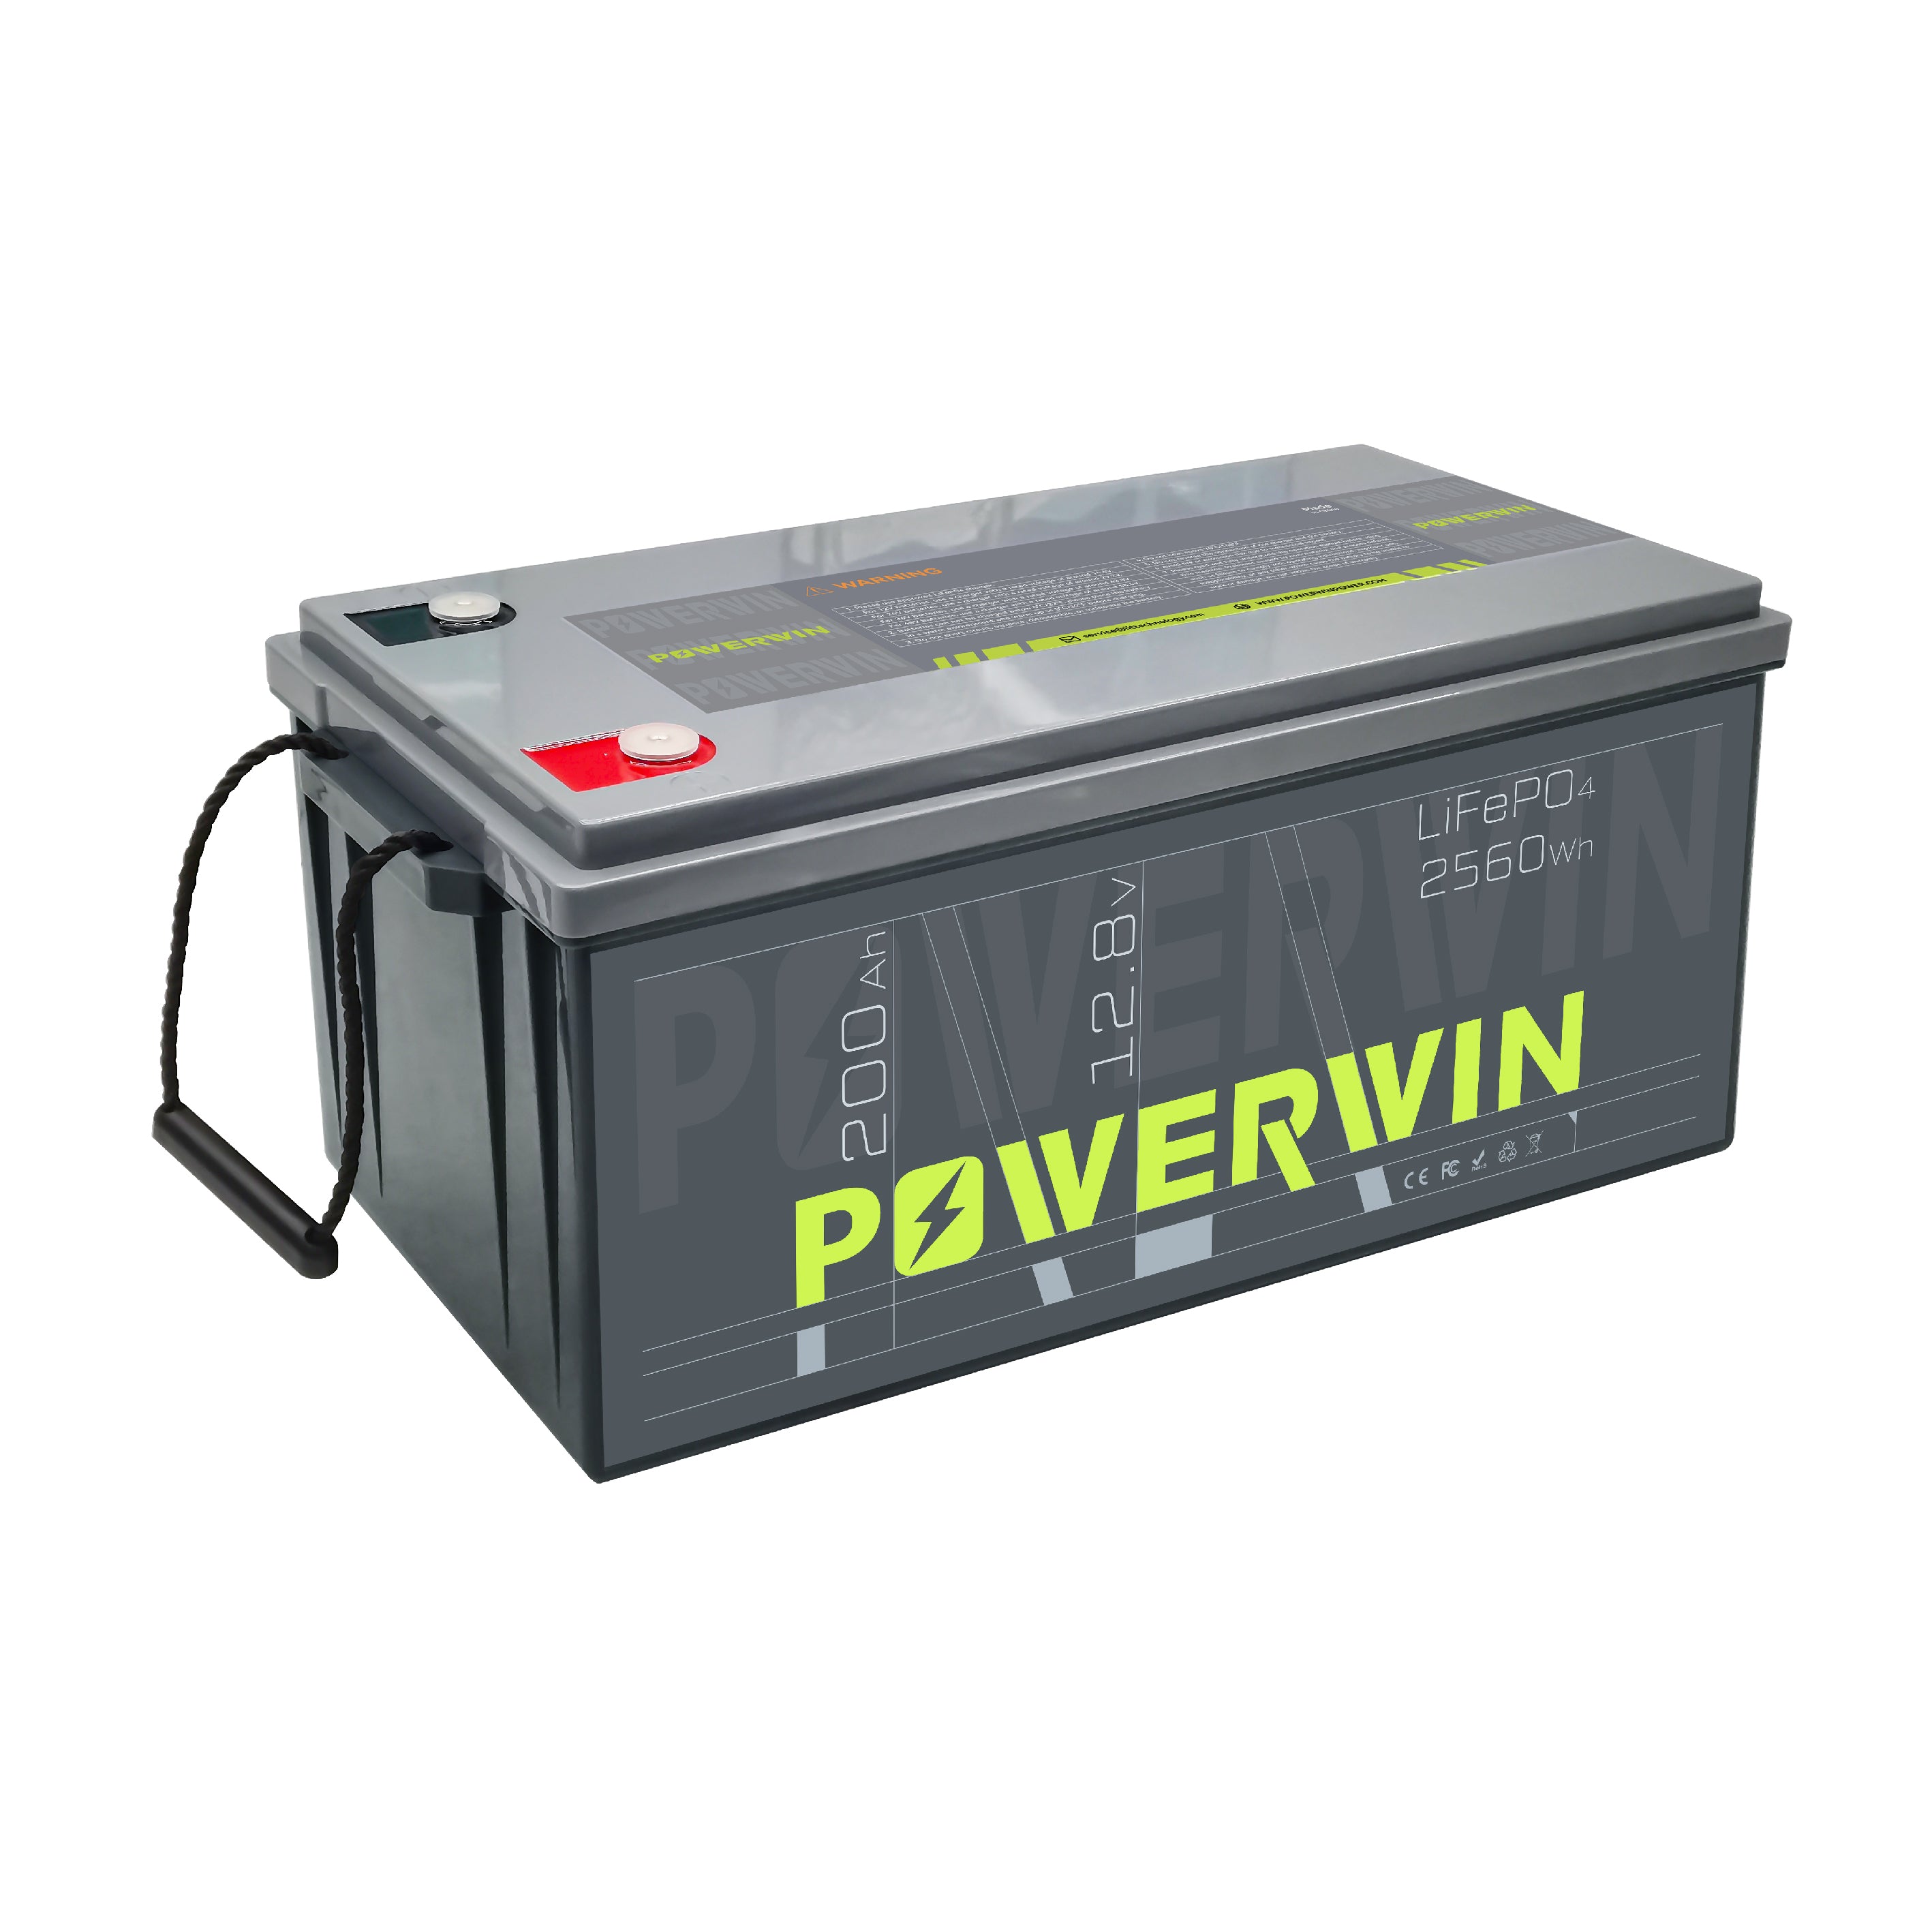 POWERWIN BT200 12V 200Ah 2560Wh LiFePO4 Lithium Battery